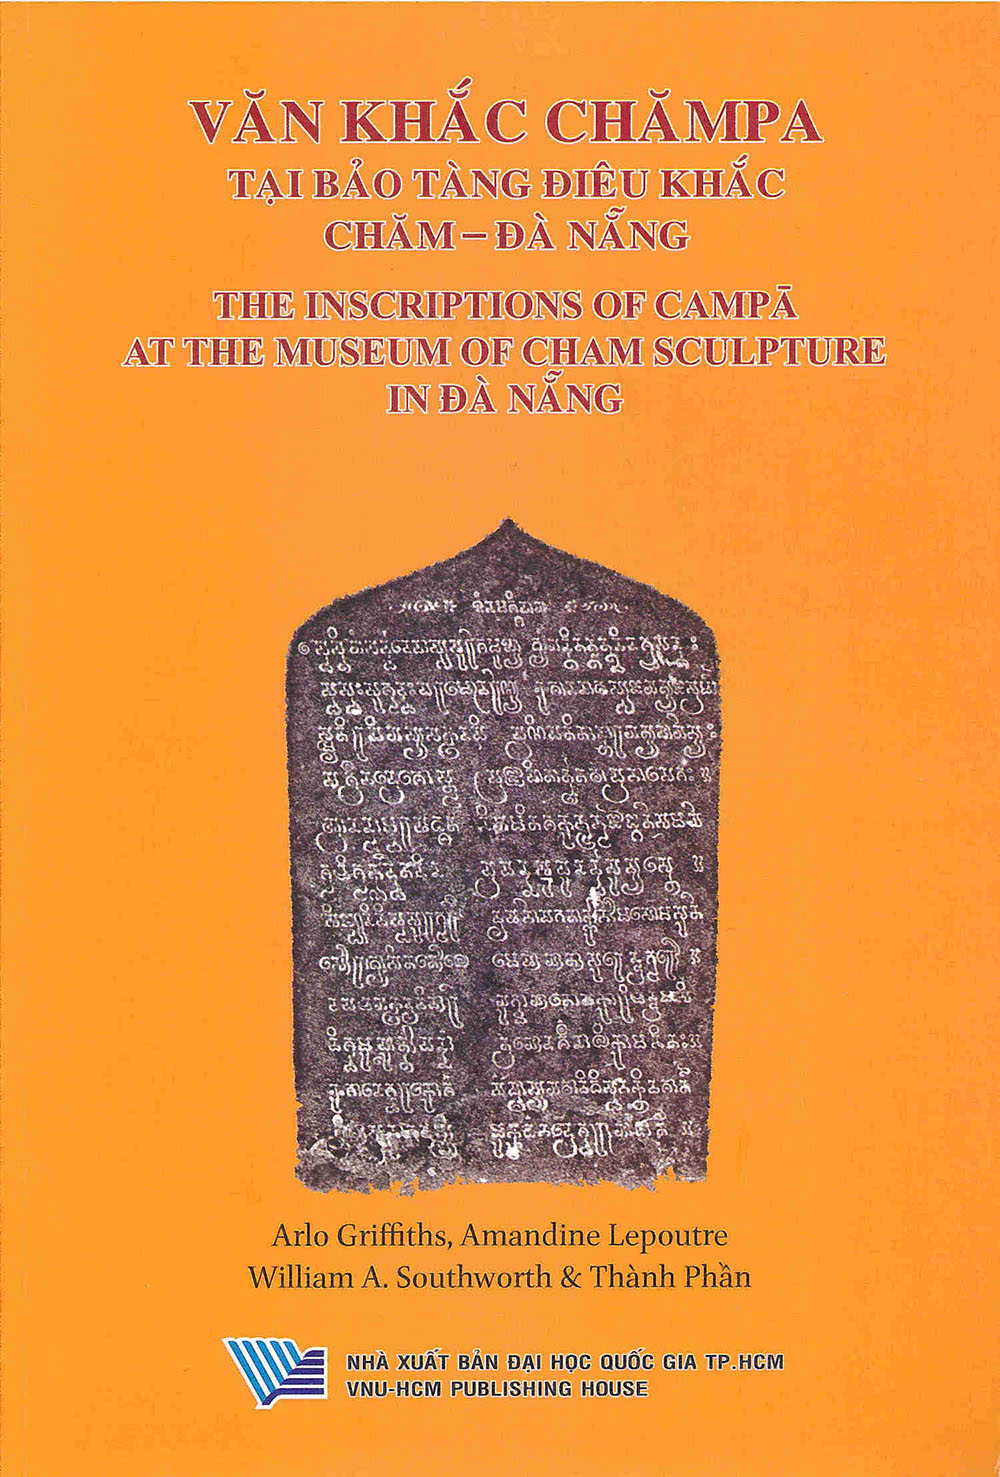 The Inscriptions of Campa at the Museum of Cham Sculpture in Da Nang